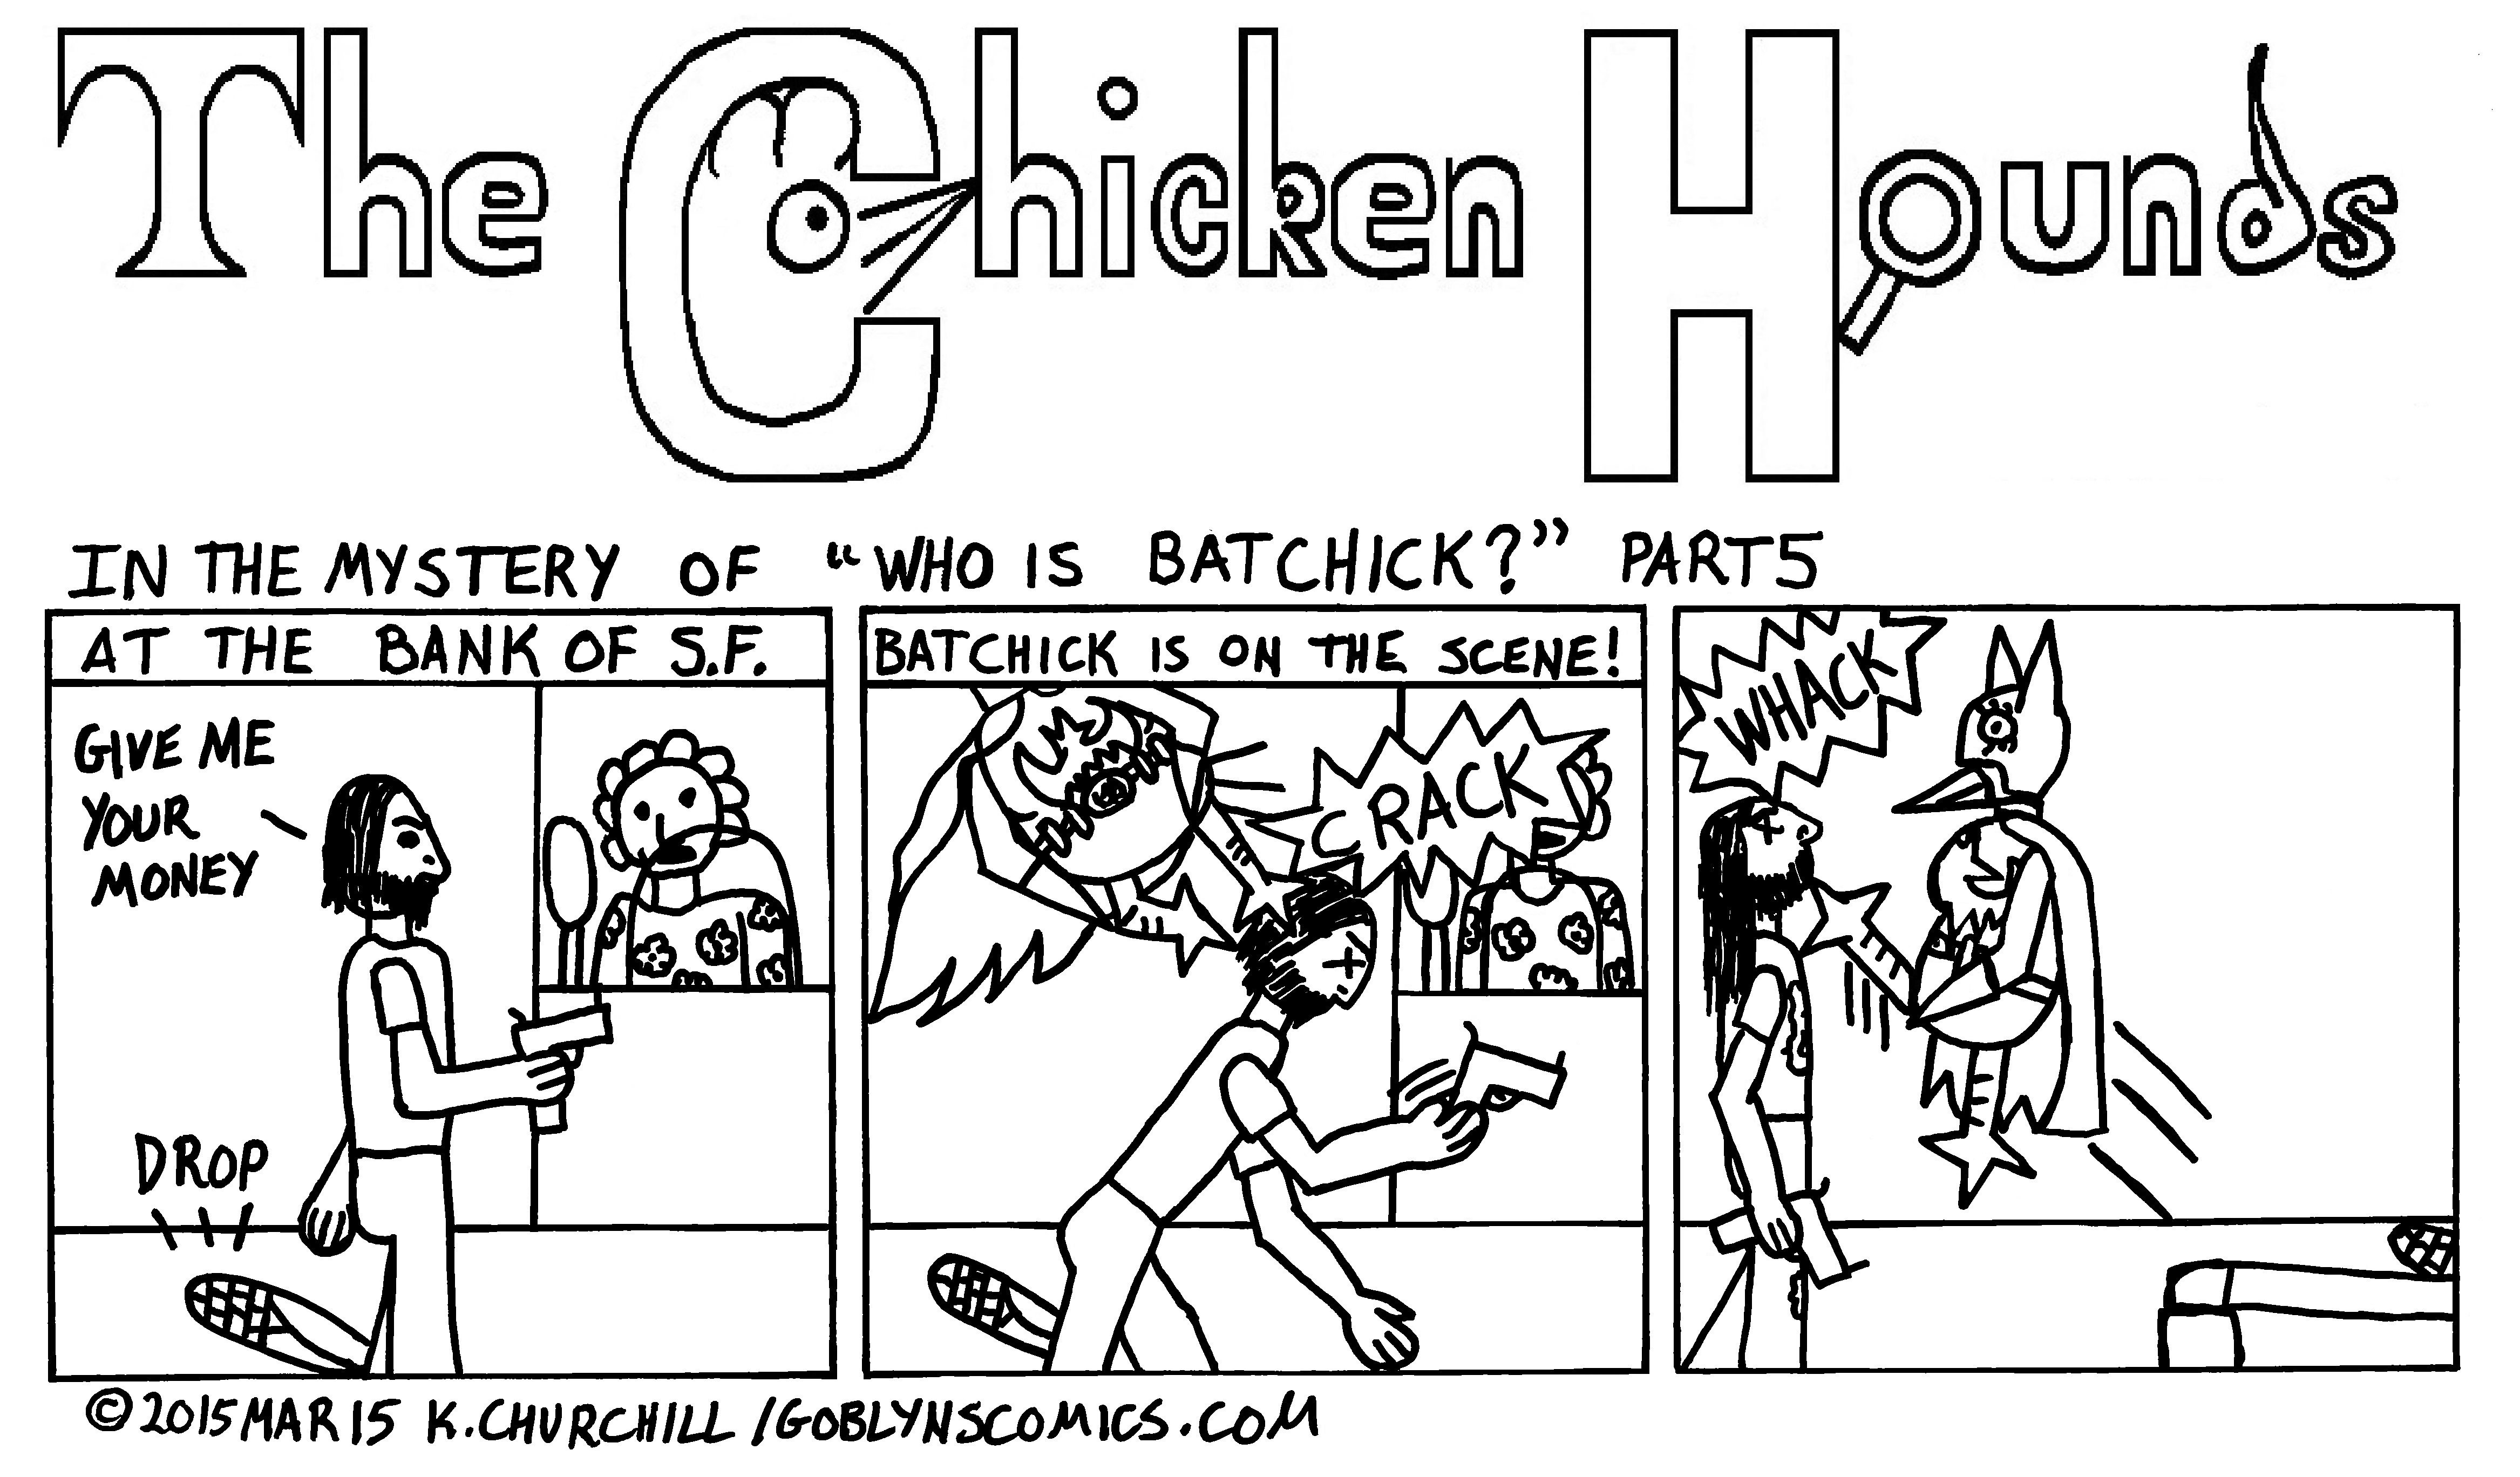 The Chicken Hounds in the Mystery of "Who is BatChick?" Part 5